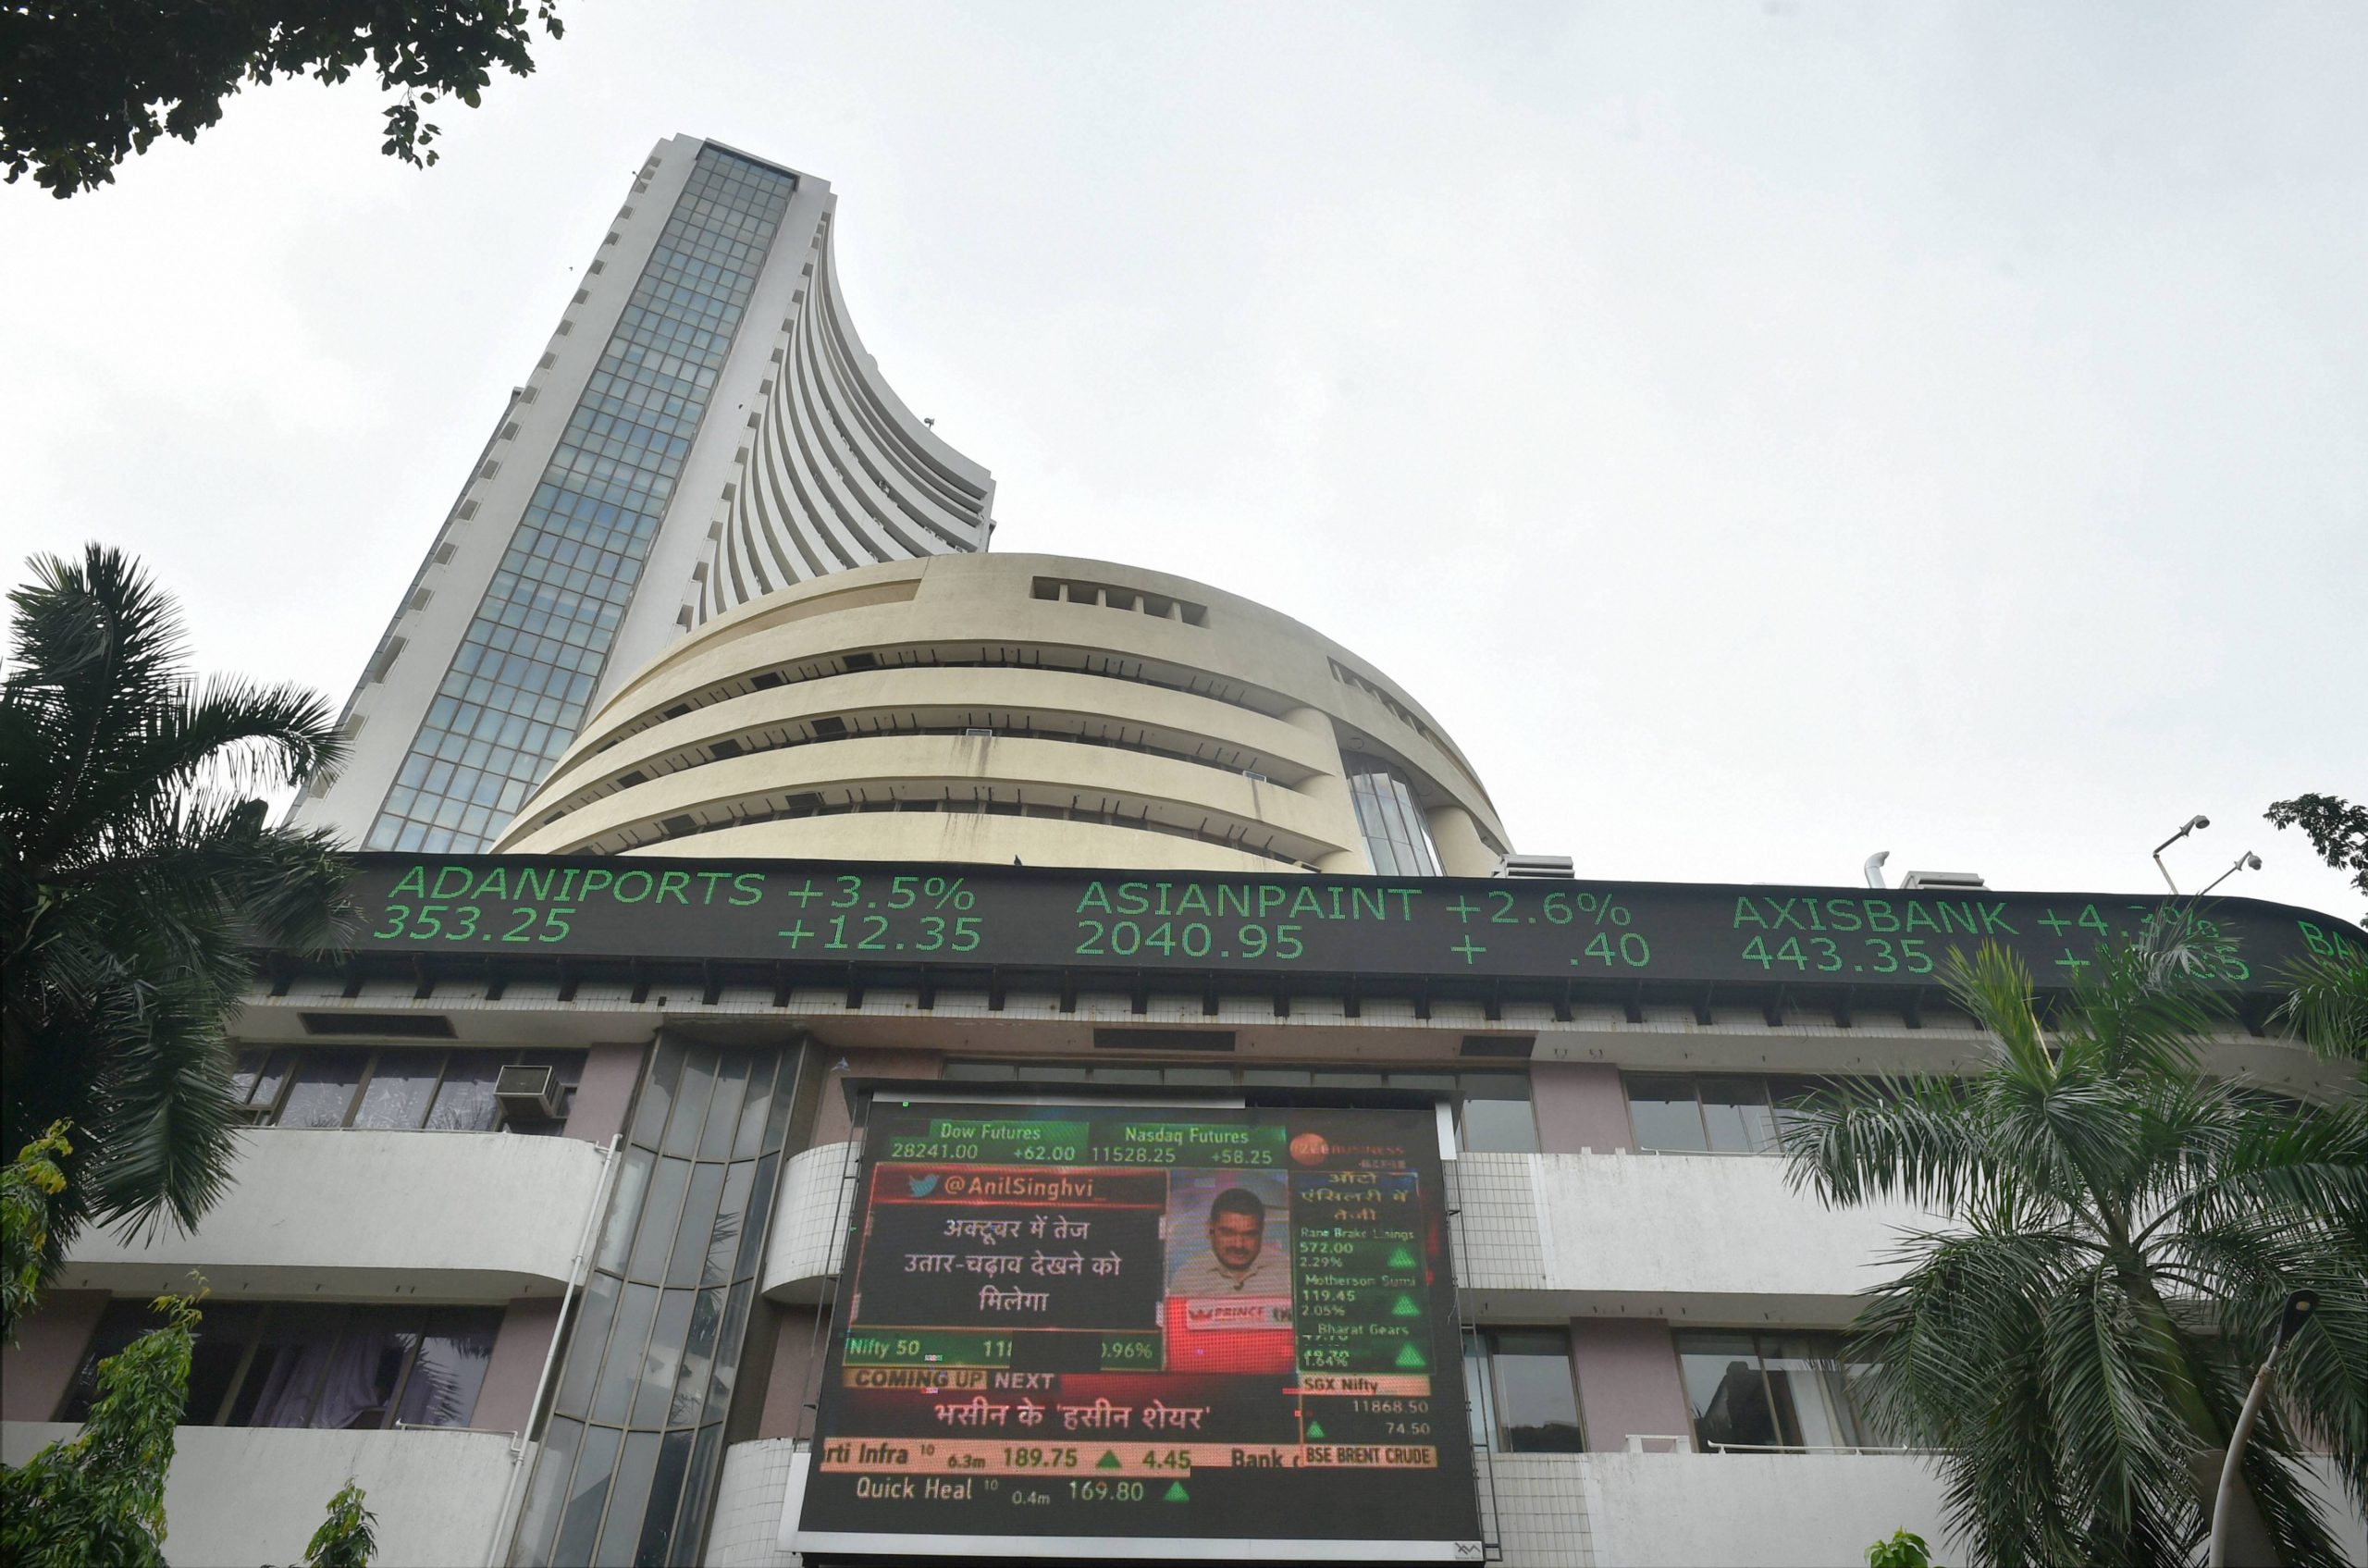 Budget boost for markets: Sensex surges 2,300 points after Sitharaman’s speech, Nifty reclaims 14k